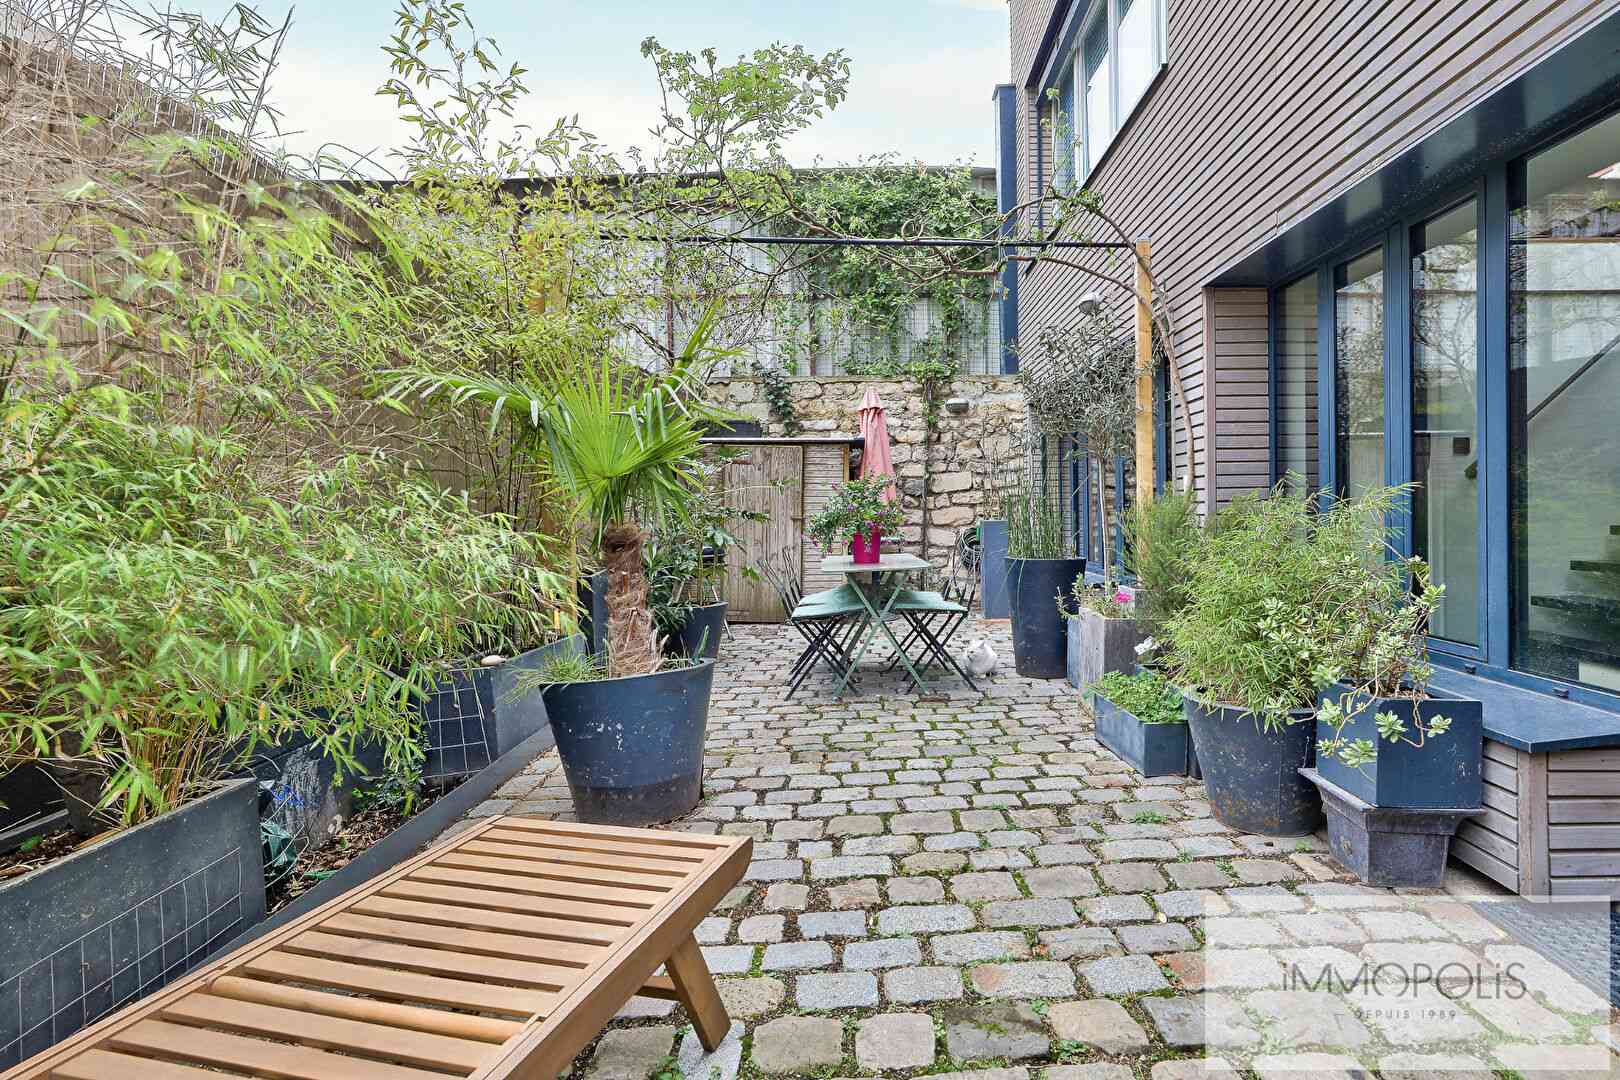 Off-Market: House with exceptional services in Saint Ouen sur Seine, 6 rooms, large reception, 1 interior courtyard and 1 terrace 3